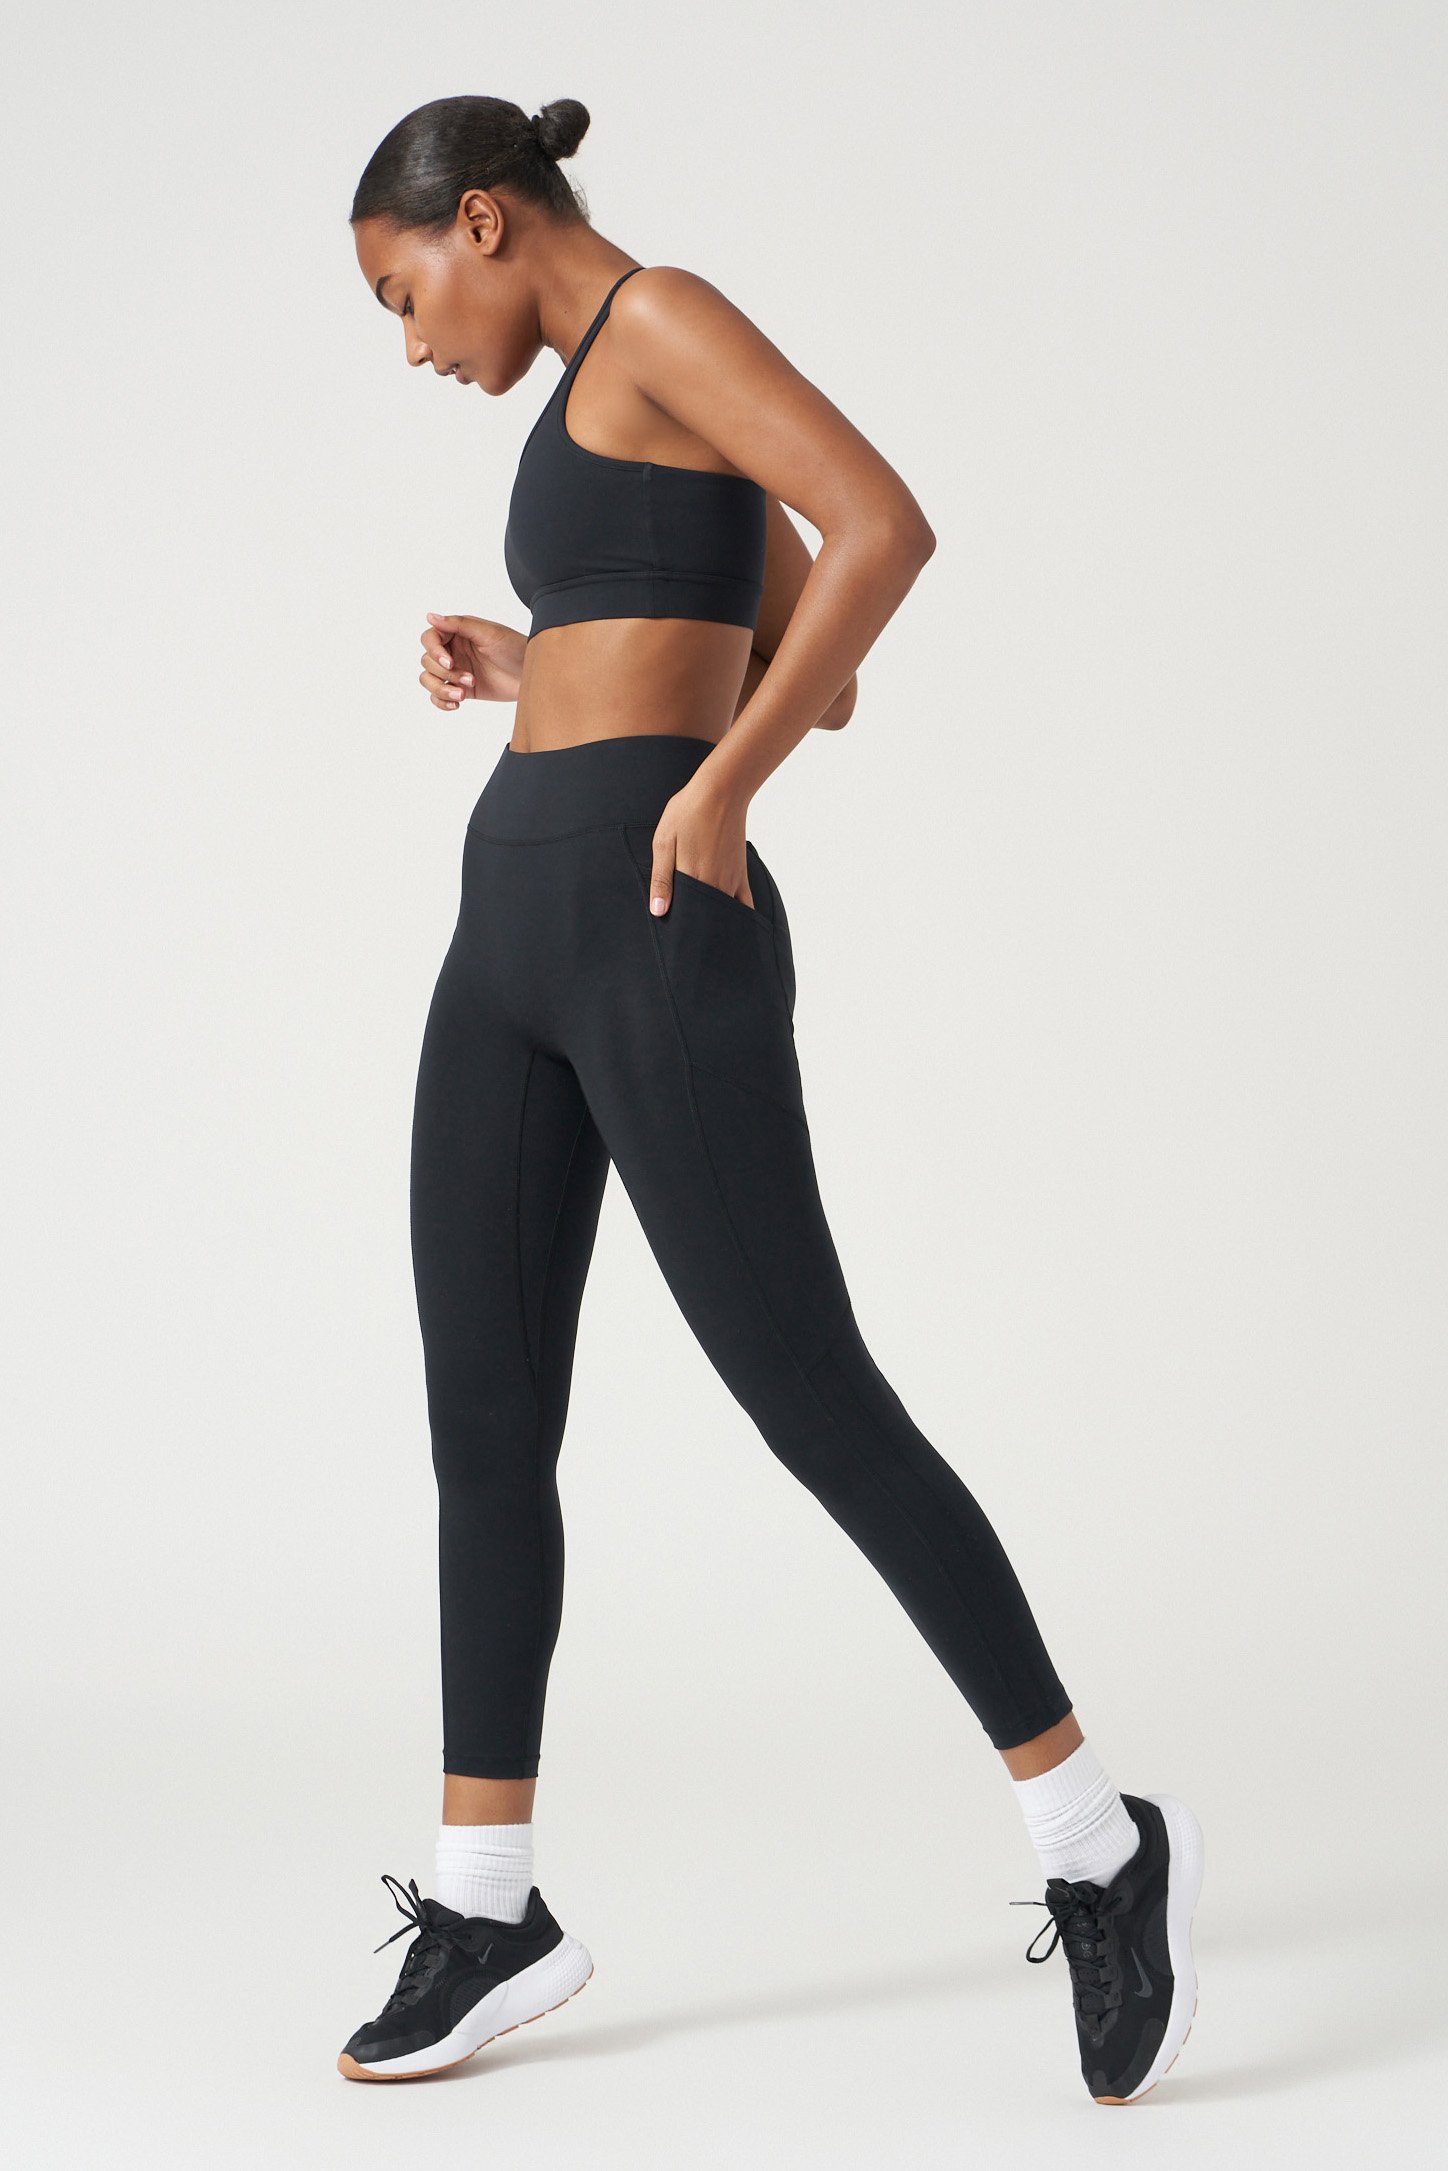 The Hunt for the Perfect Legging